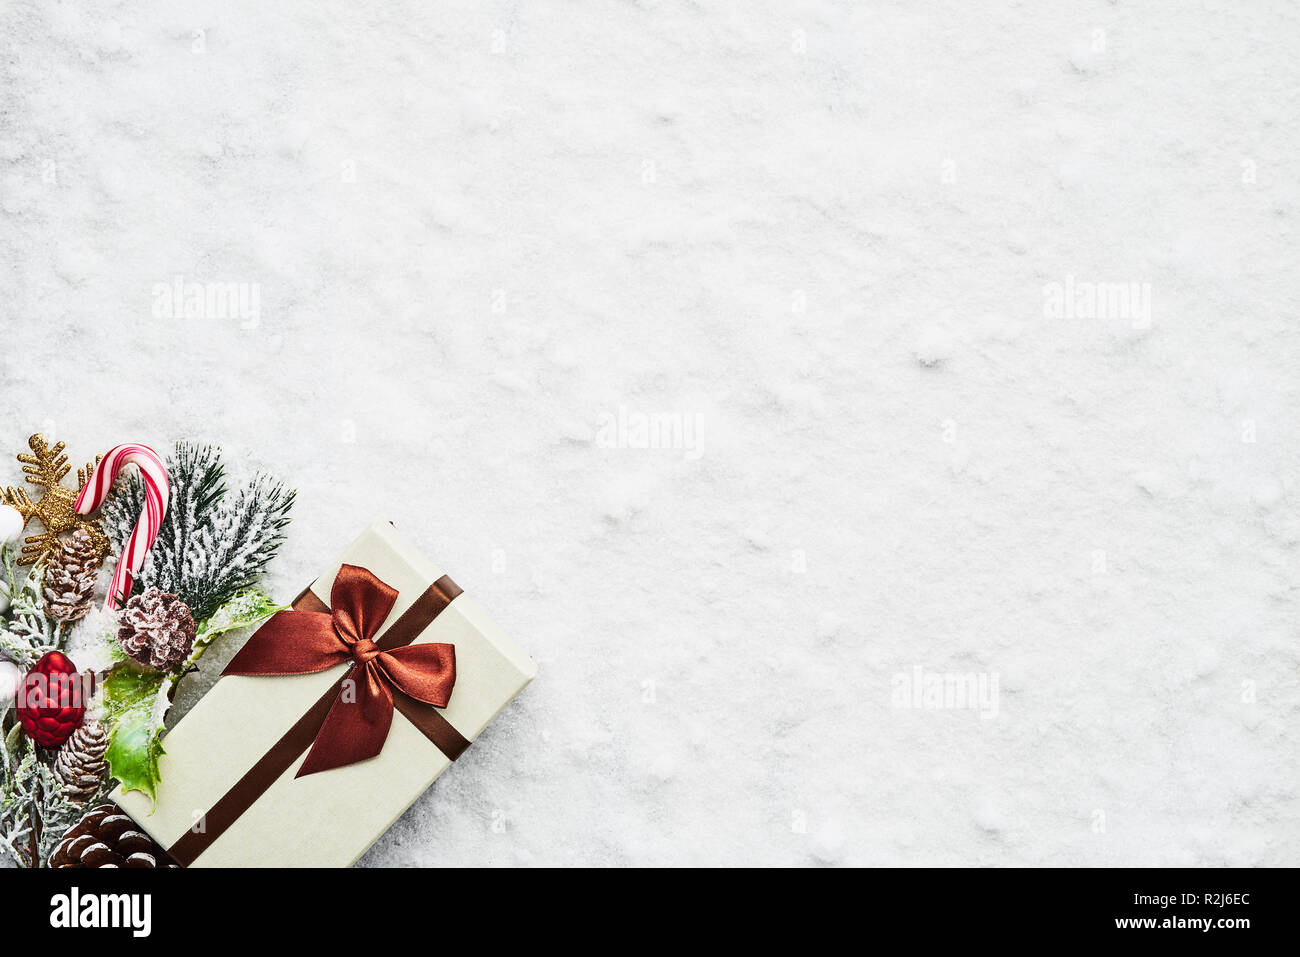 Top view of wrapped Christmas gift box with maroon ribbon and decoration on the snow. Copy space for text. Stock Photo